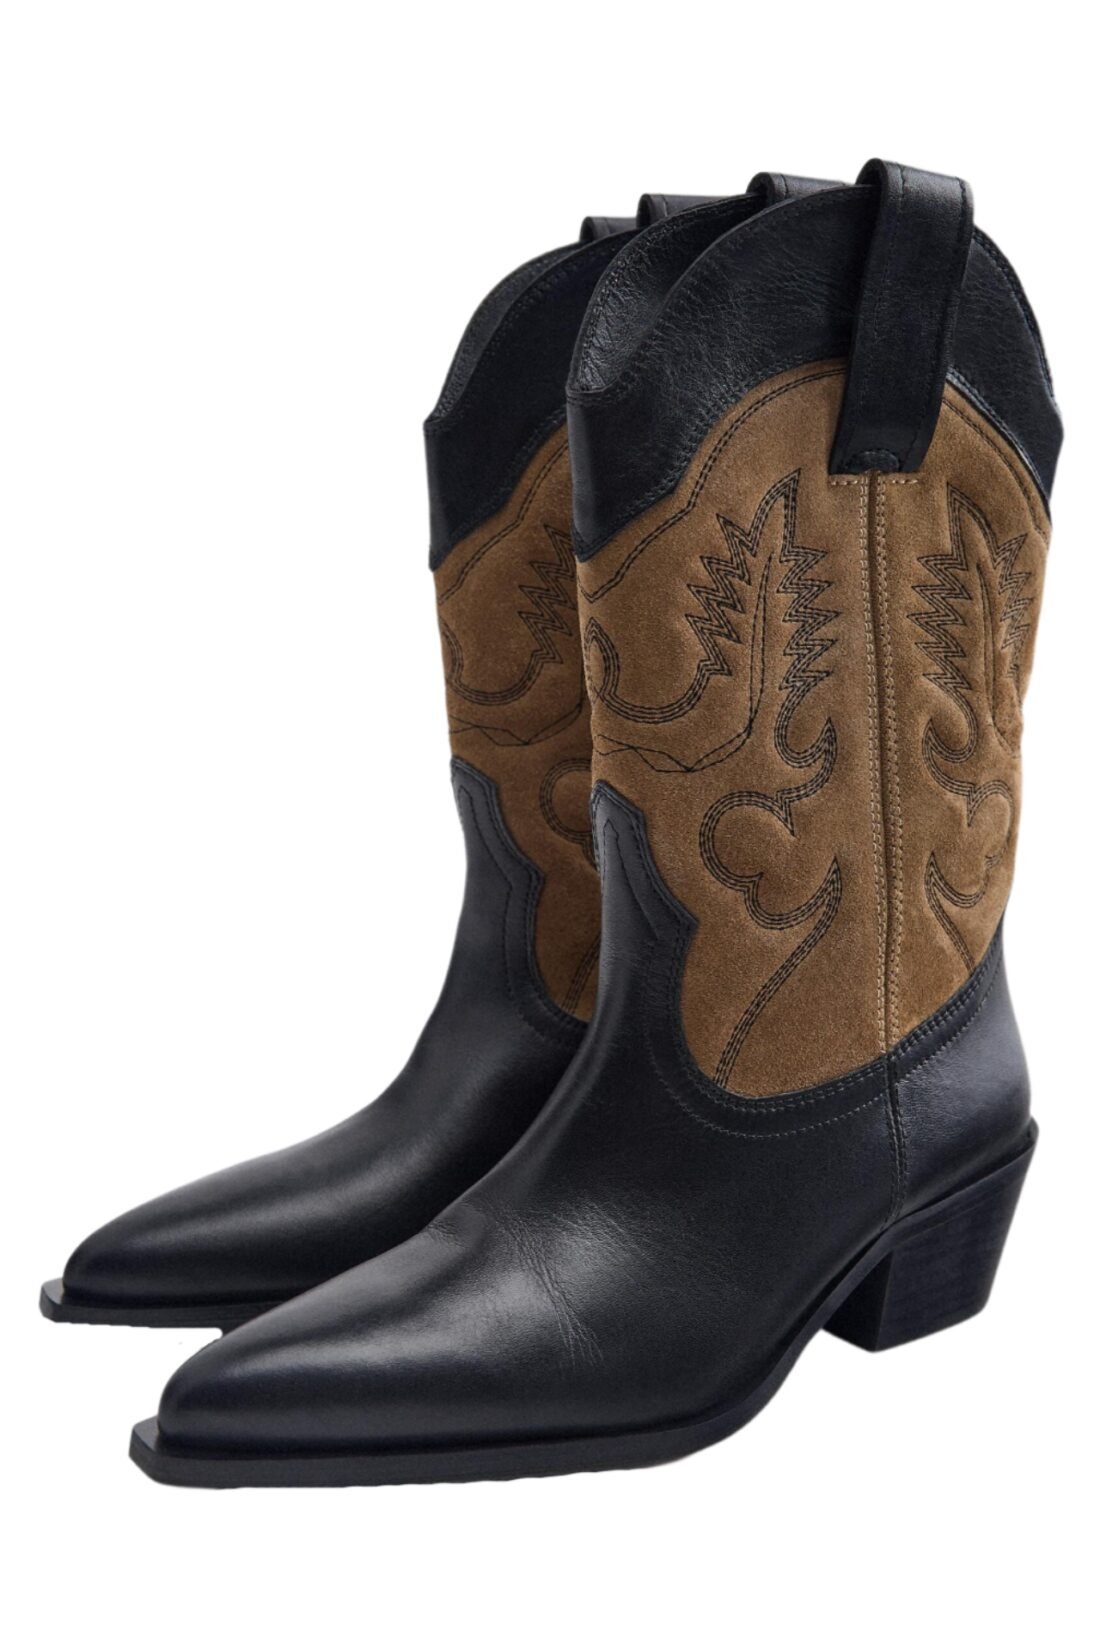 Black Western Boots 1